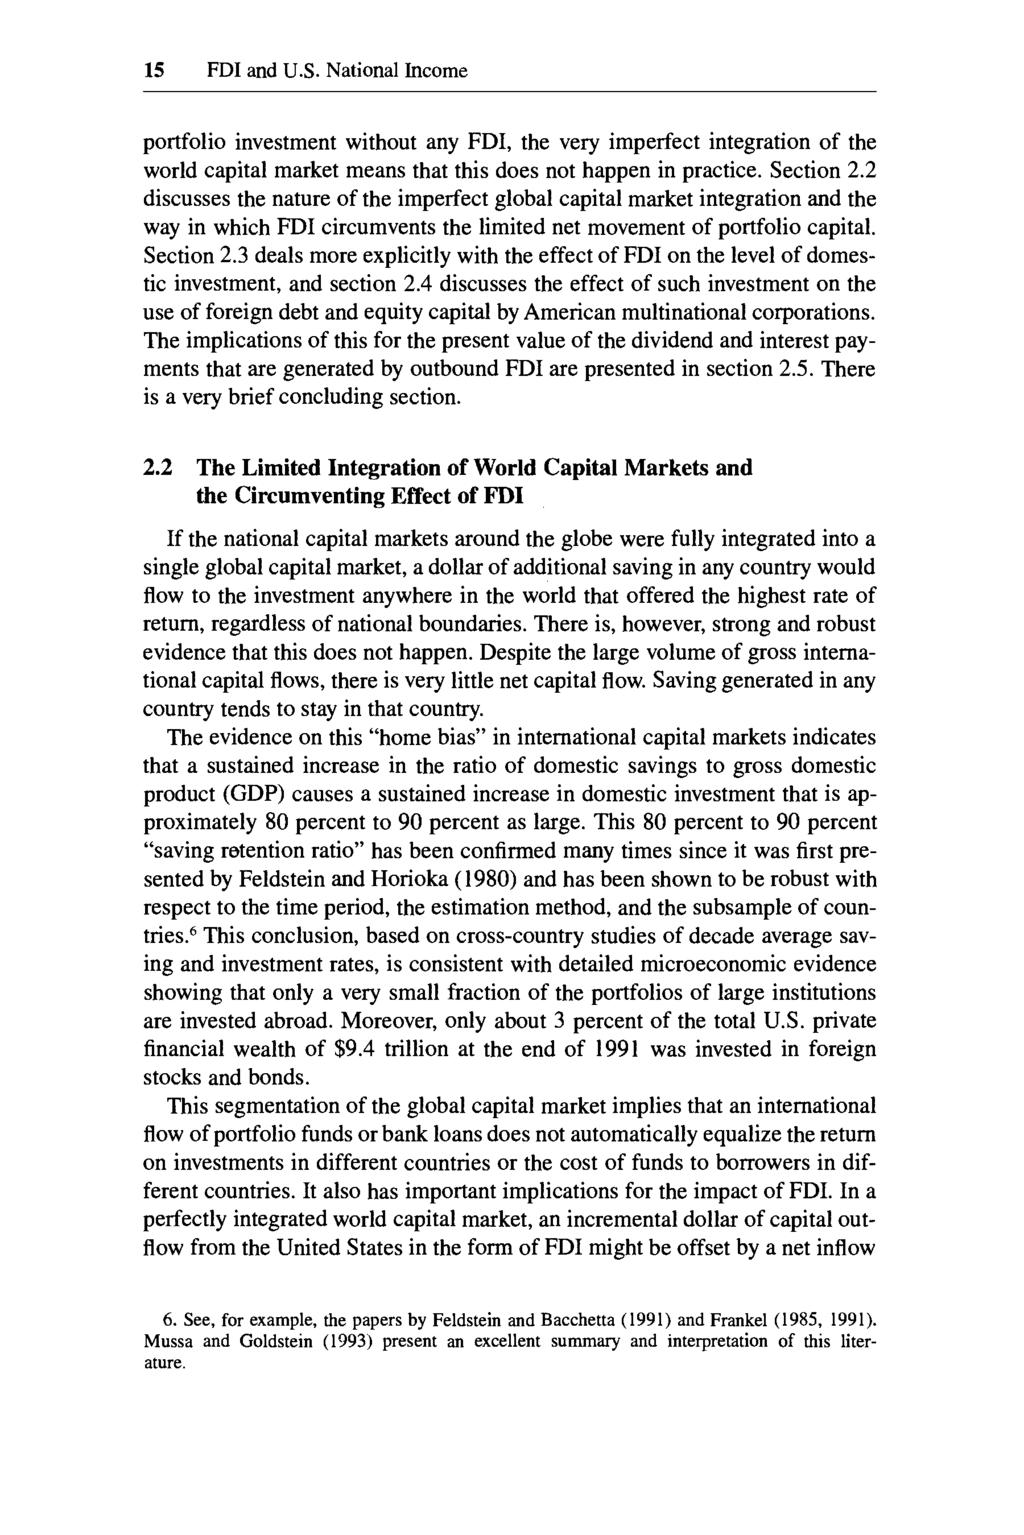 15 FDI and U.S. National Income portfolio investment without any FDI, the very imperfect integration of the world capital market means that this does not happen in practice. Section 2.